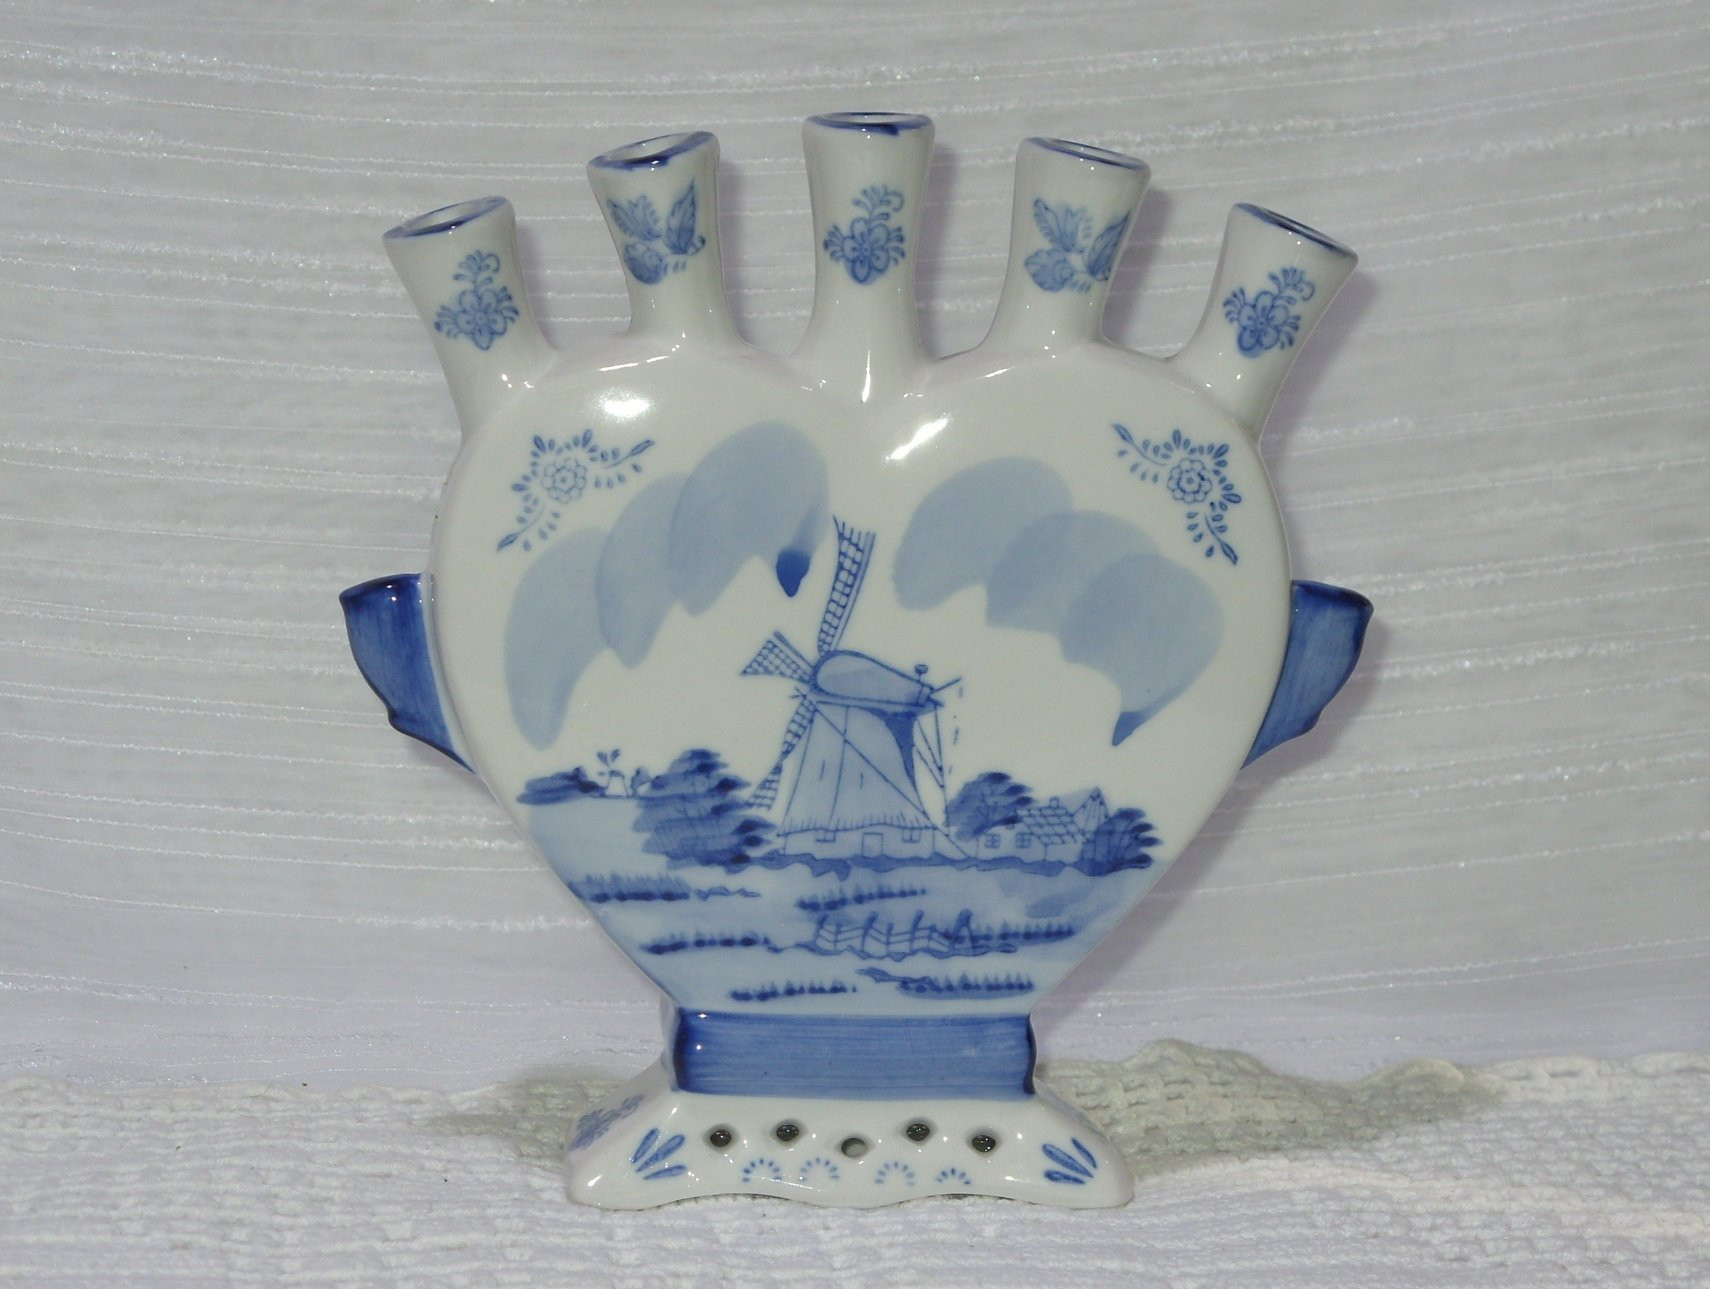 21 Unique Hand Painted Delft Holland Bud Vase 2022 free download hand painted delft holland bud vase of delftware hand painted royal twickel ter steege bv porcelain etsy with dc29fc294c28ezoom